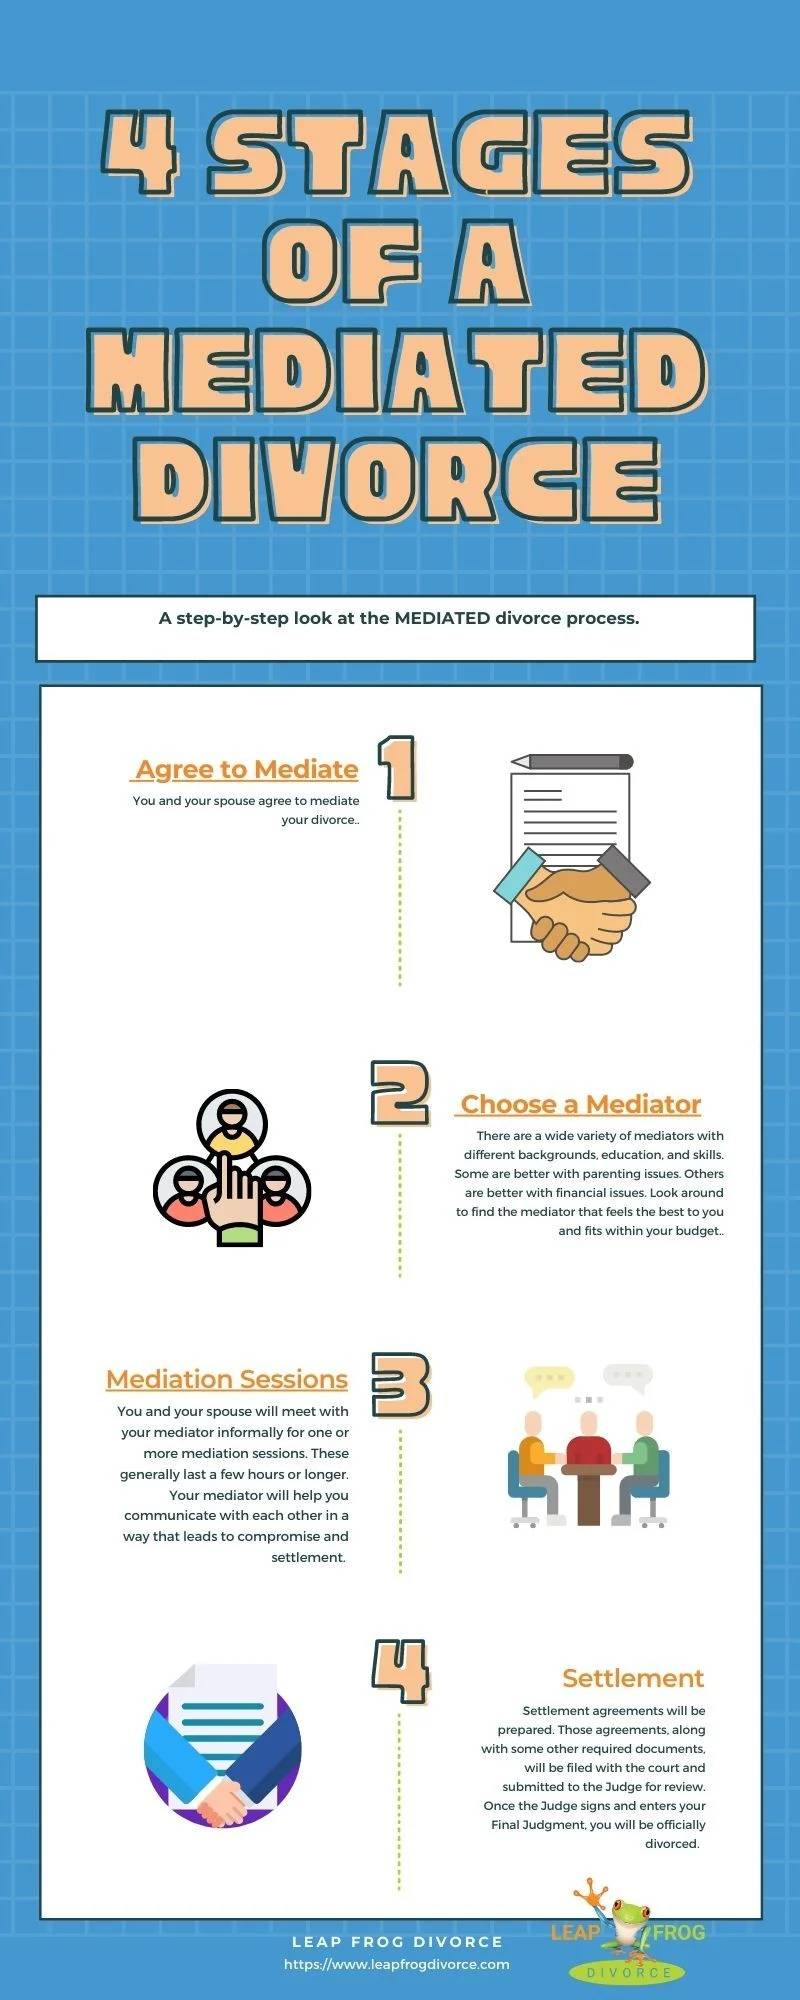 4 Stages of a Mediated Divorce infographic